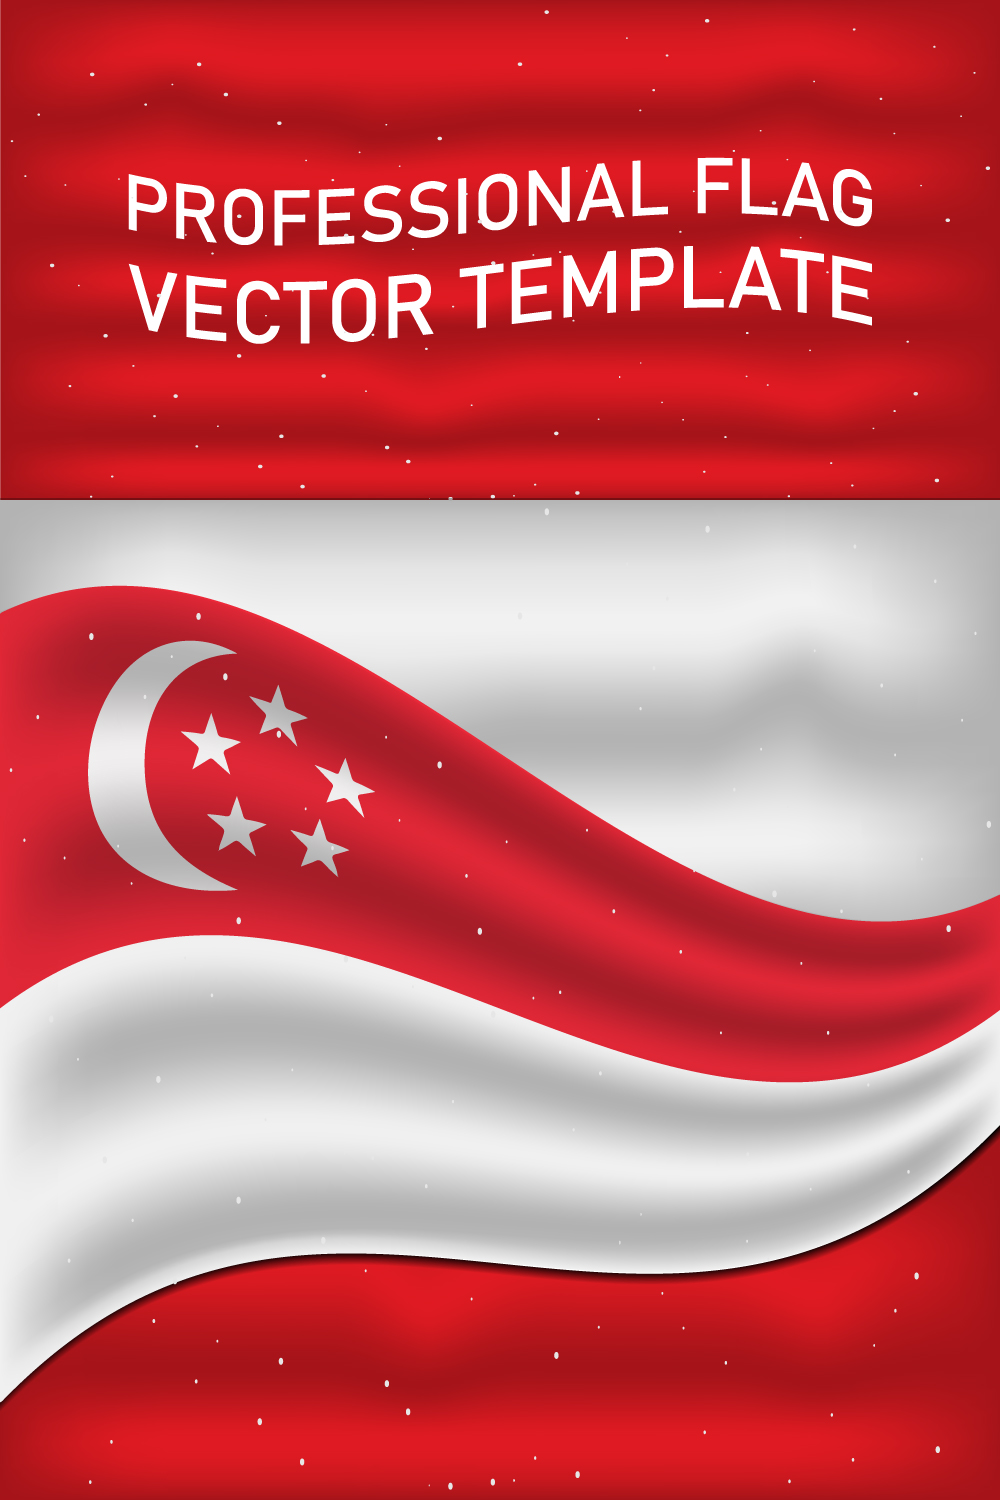 Irresistible image of the flag of Singapore.